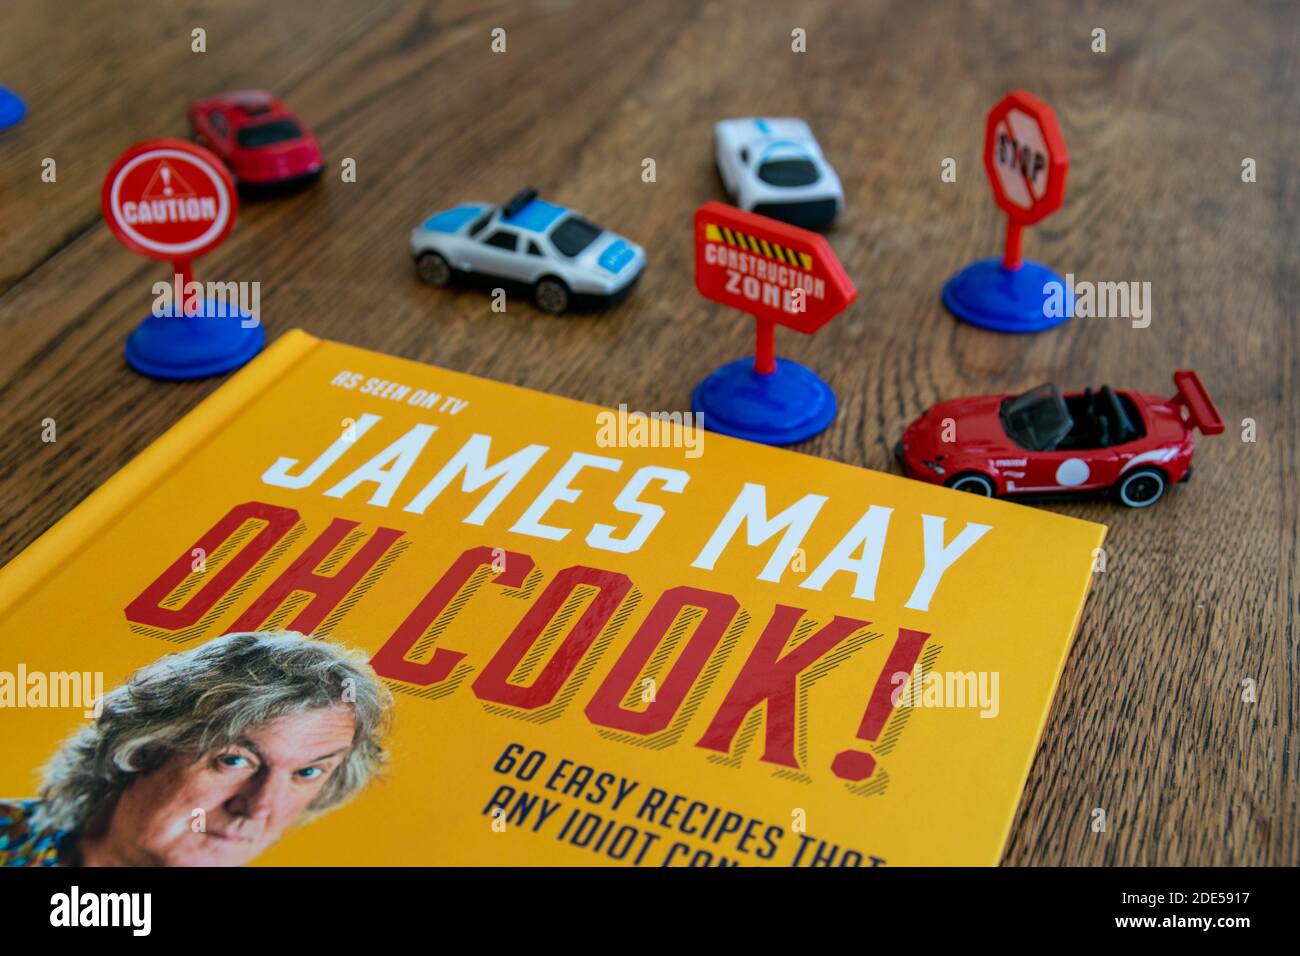 Durham, UK - 17 Nov 2020: James May Oh Cook cookery book. Top Gear car  presenter come amateur chef, James learns on the go on the TV show Oh Cook,  suc Stock Photo - Alamy